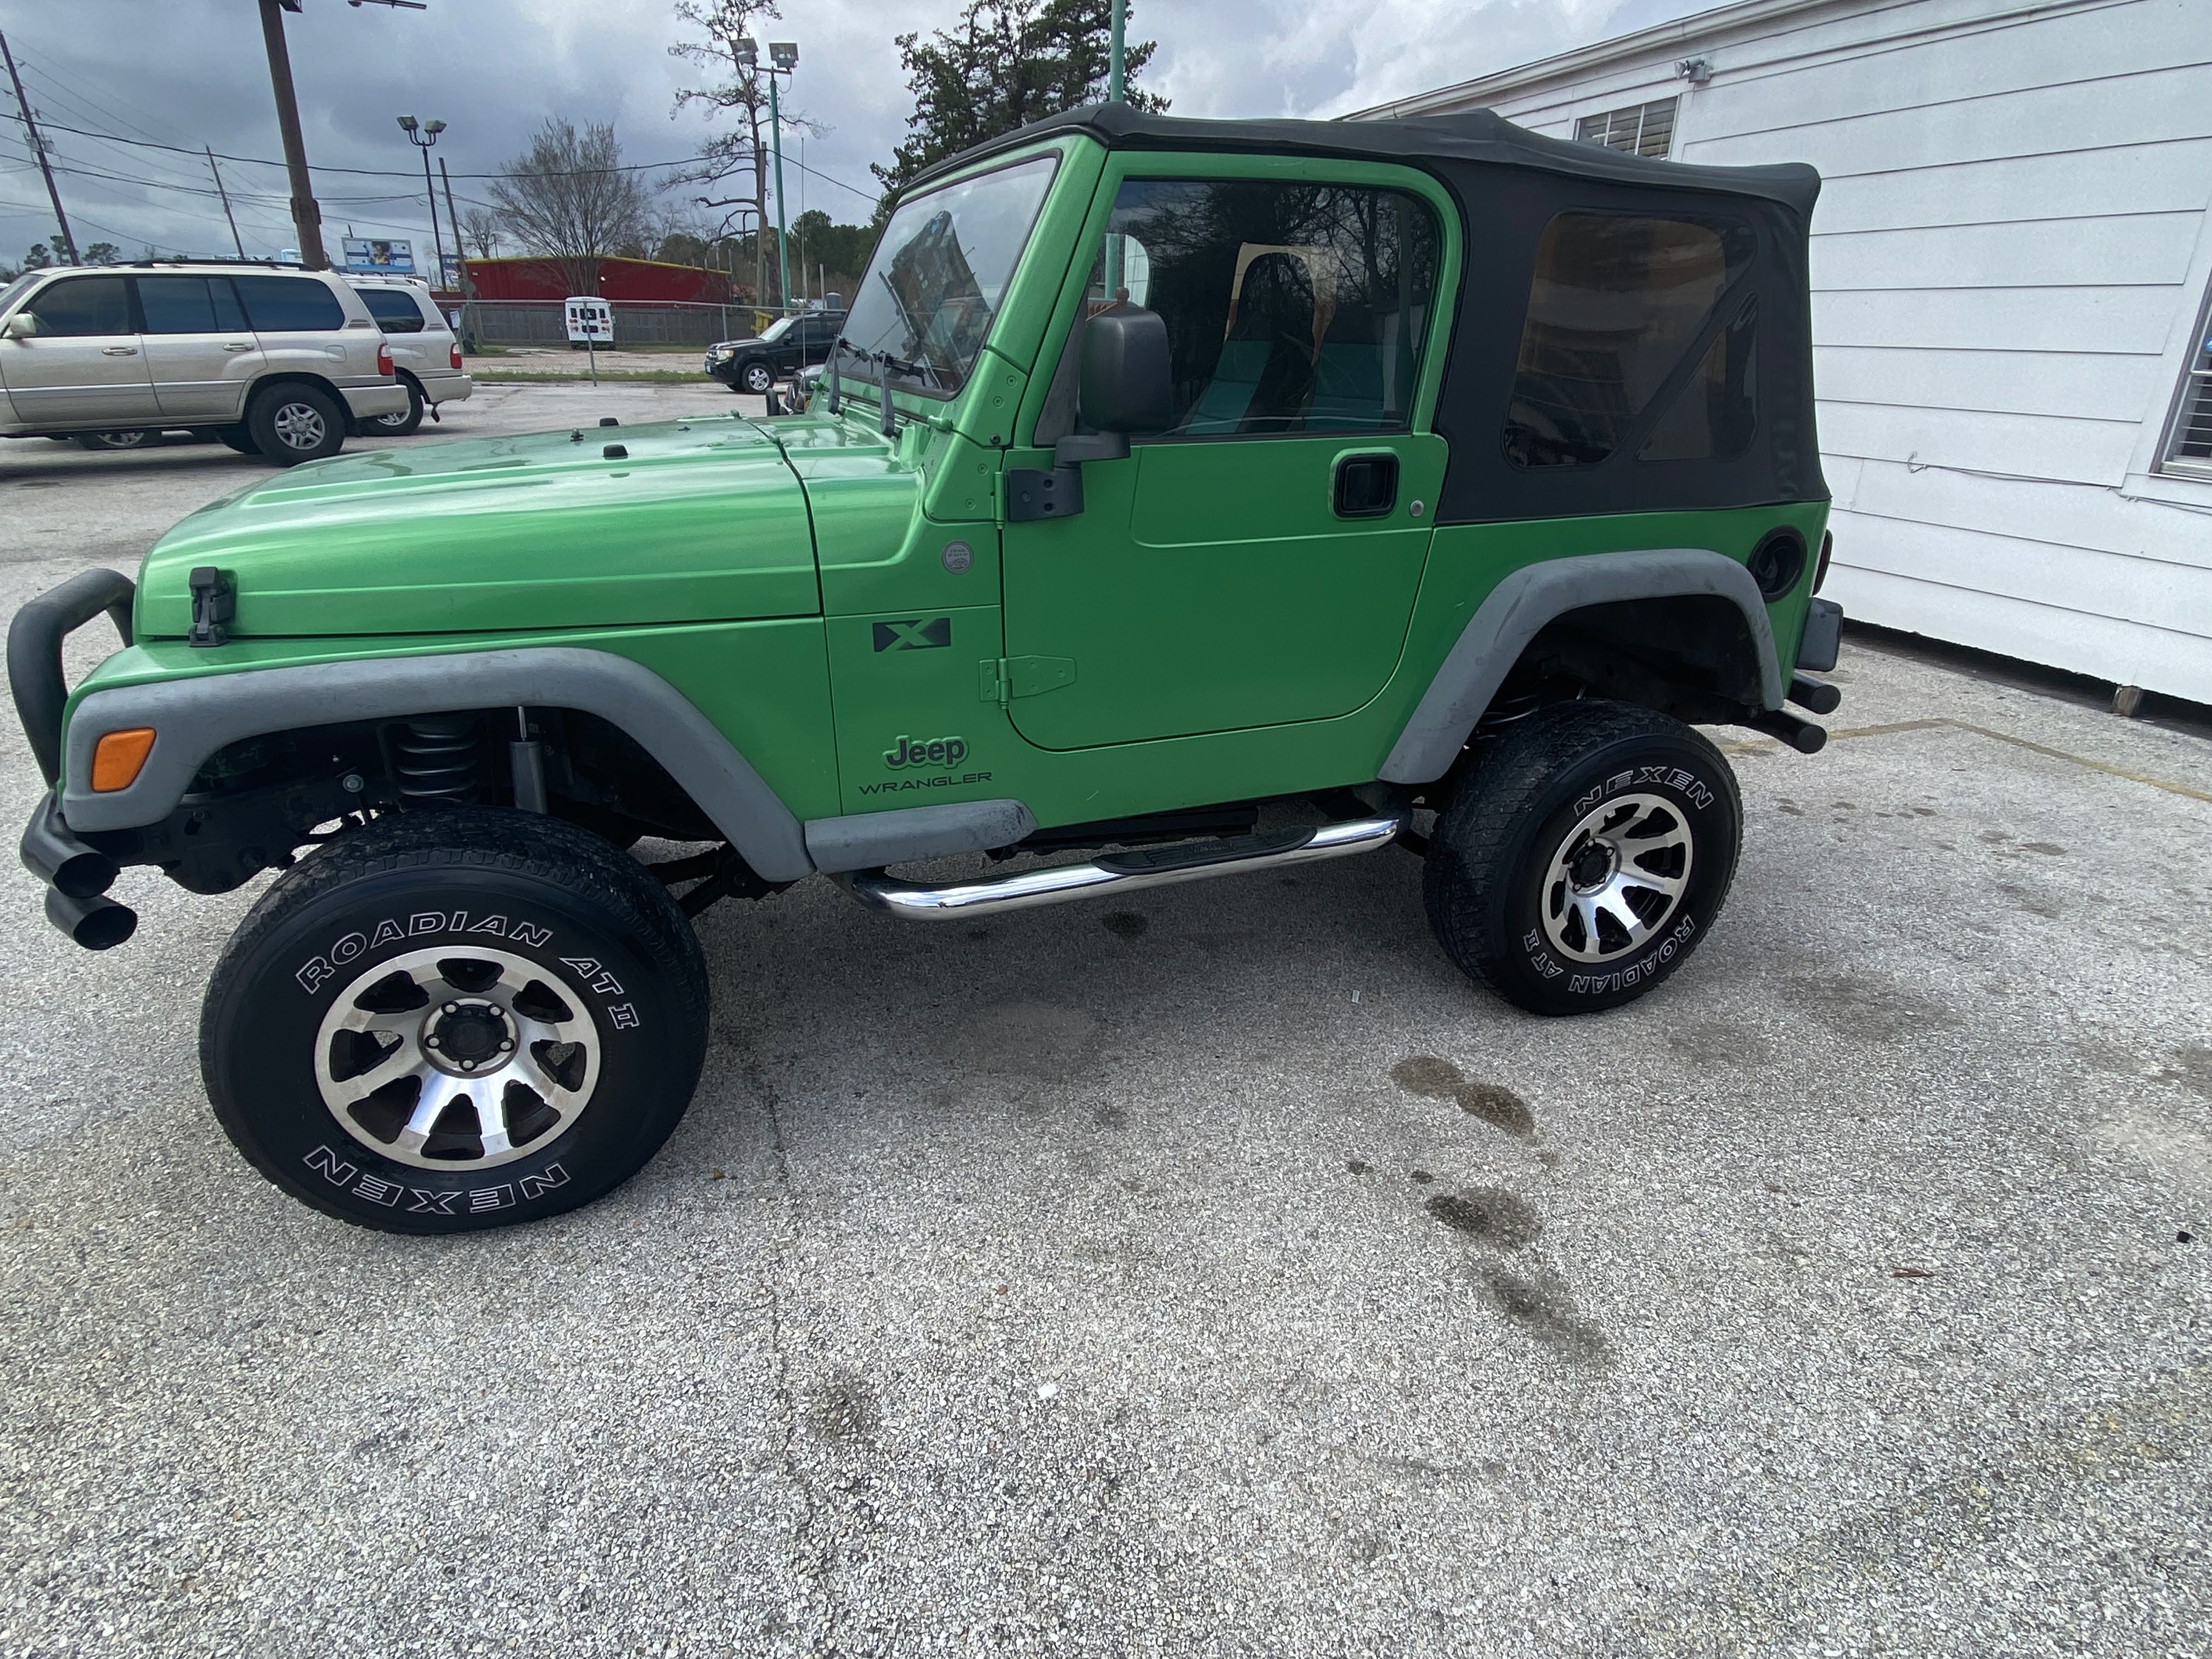 Used 2004 Jeep SUV / Crossovers for Sale Near Me in Houston, TX - Autotrader